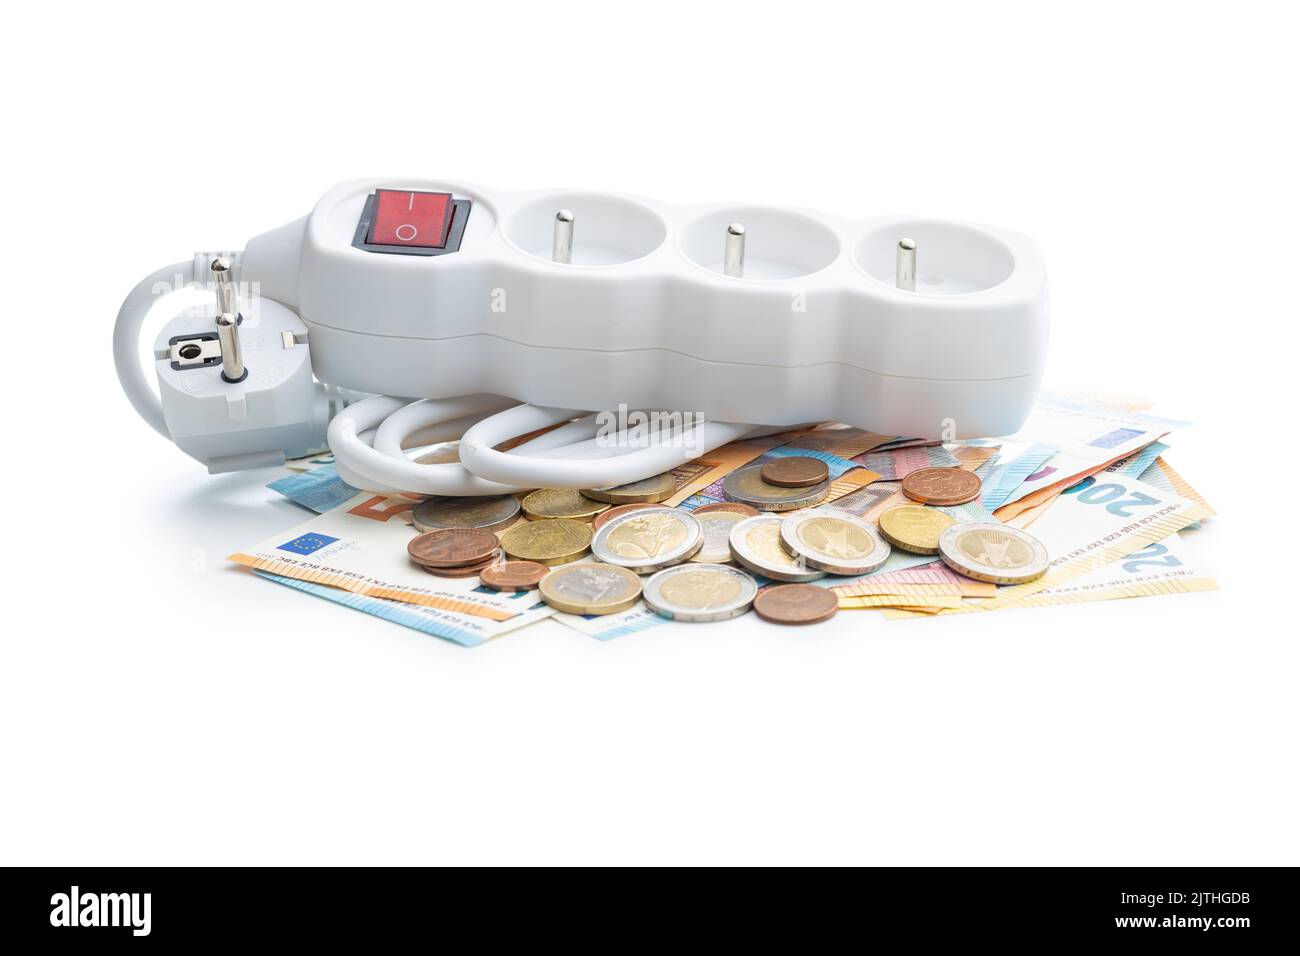 Extension power cord and euro money isolated on white background. Concept of the increasing electricity prices. Stock Photo